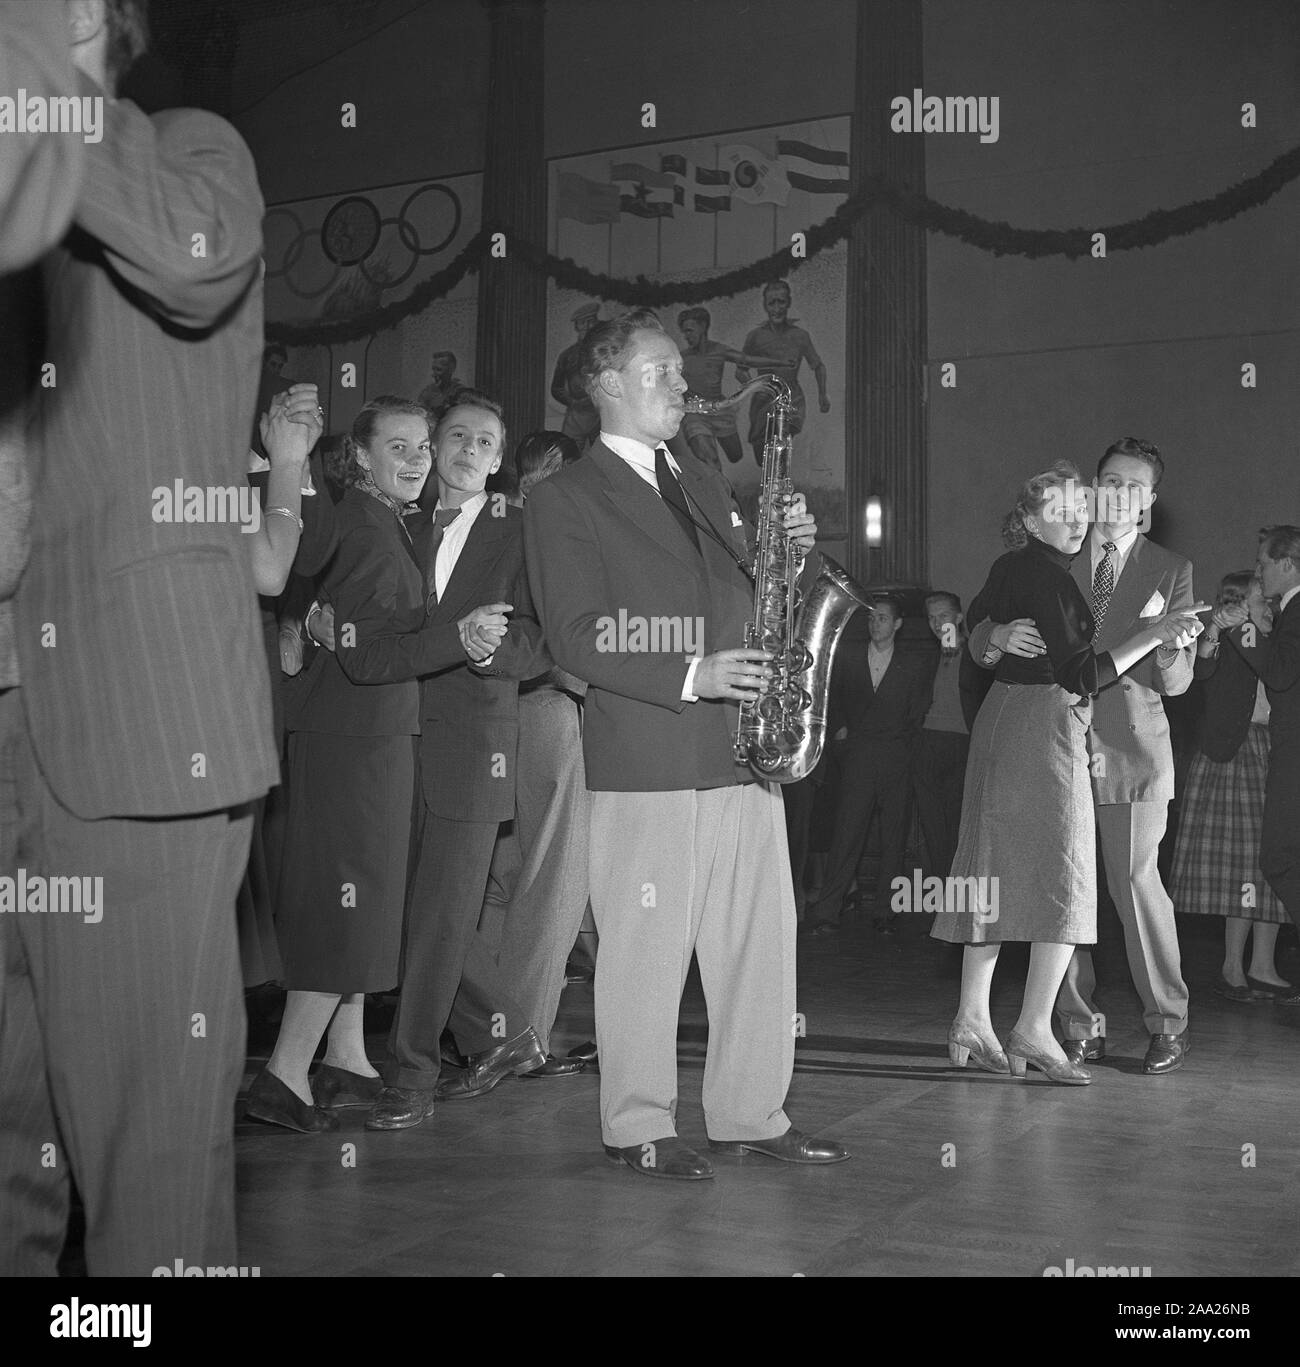 Dancing in the 1950s. The dance floor is filled with dancing couples moving to the music. A saxophonist is standing amongst them playing.  Sweden 1951. Ref 1871 Stock Photo